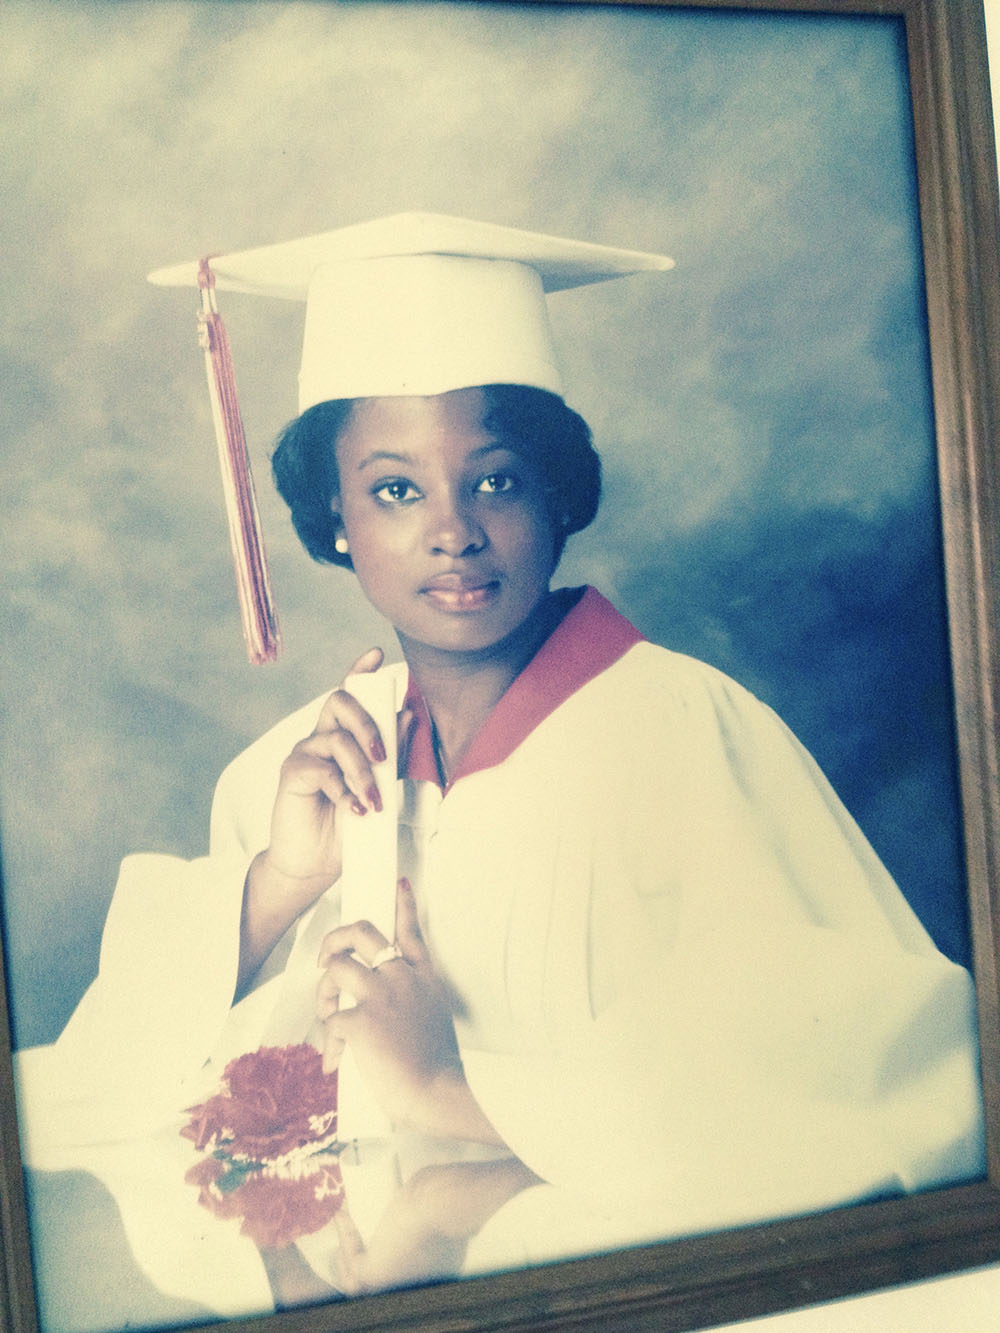 A young woman wearing a graduation cap and gown.